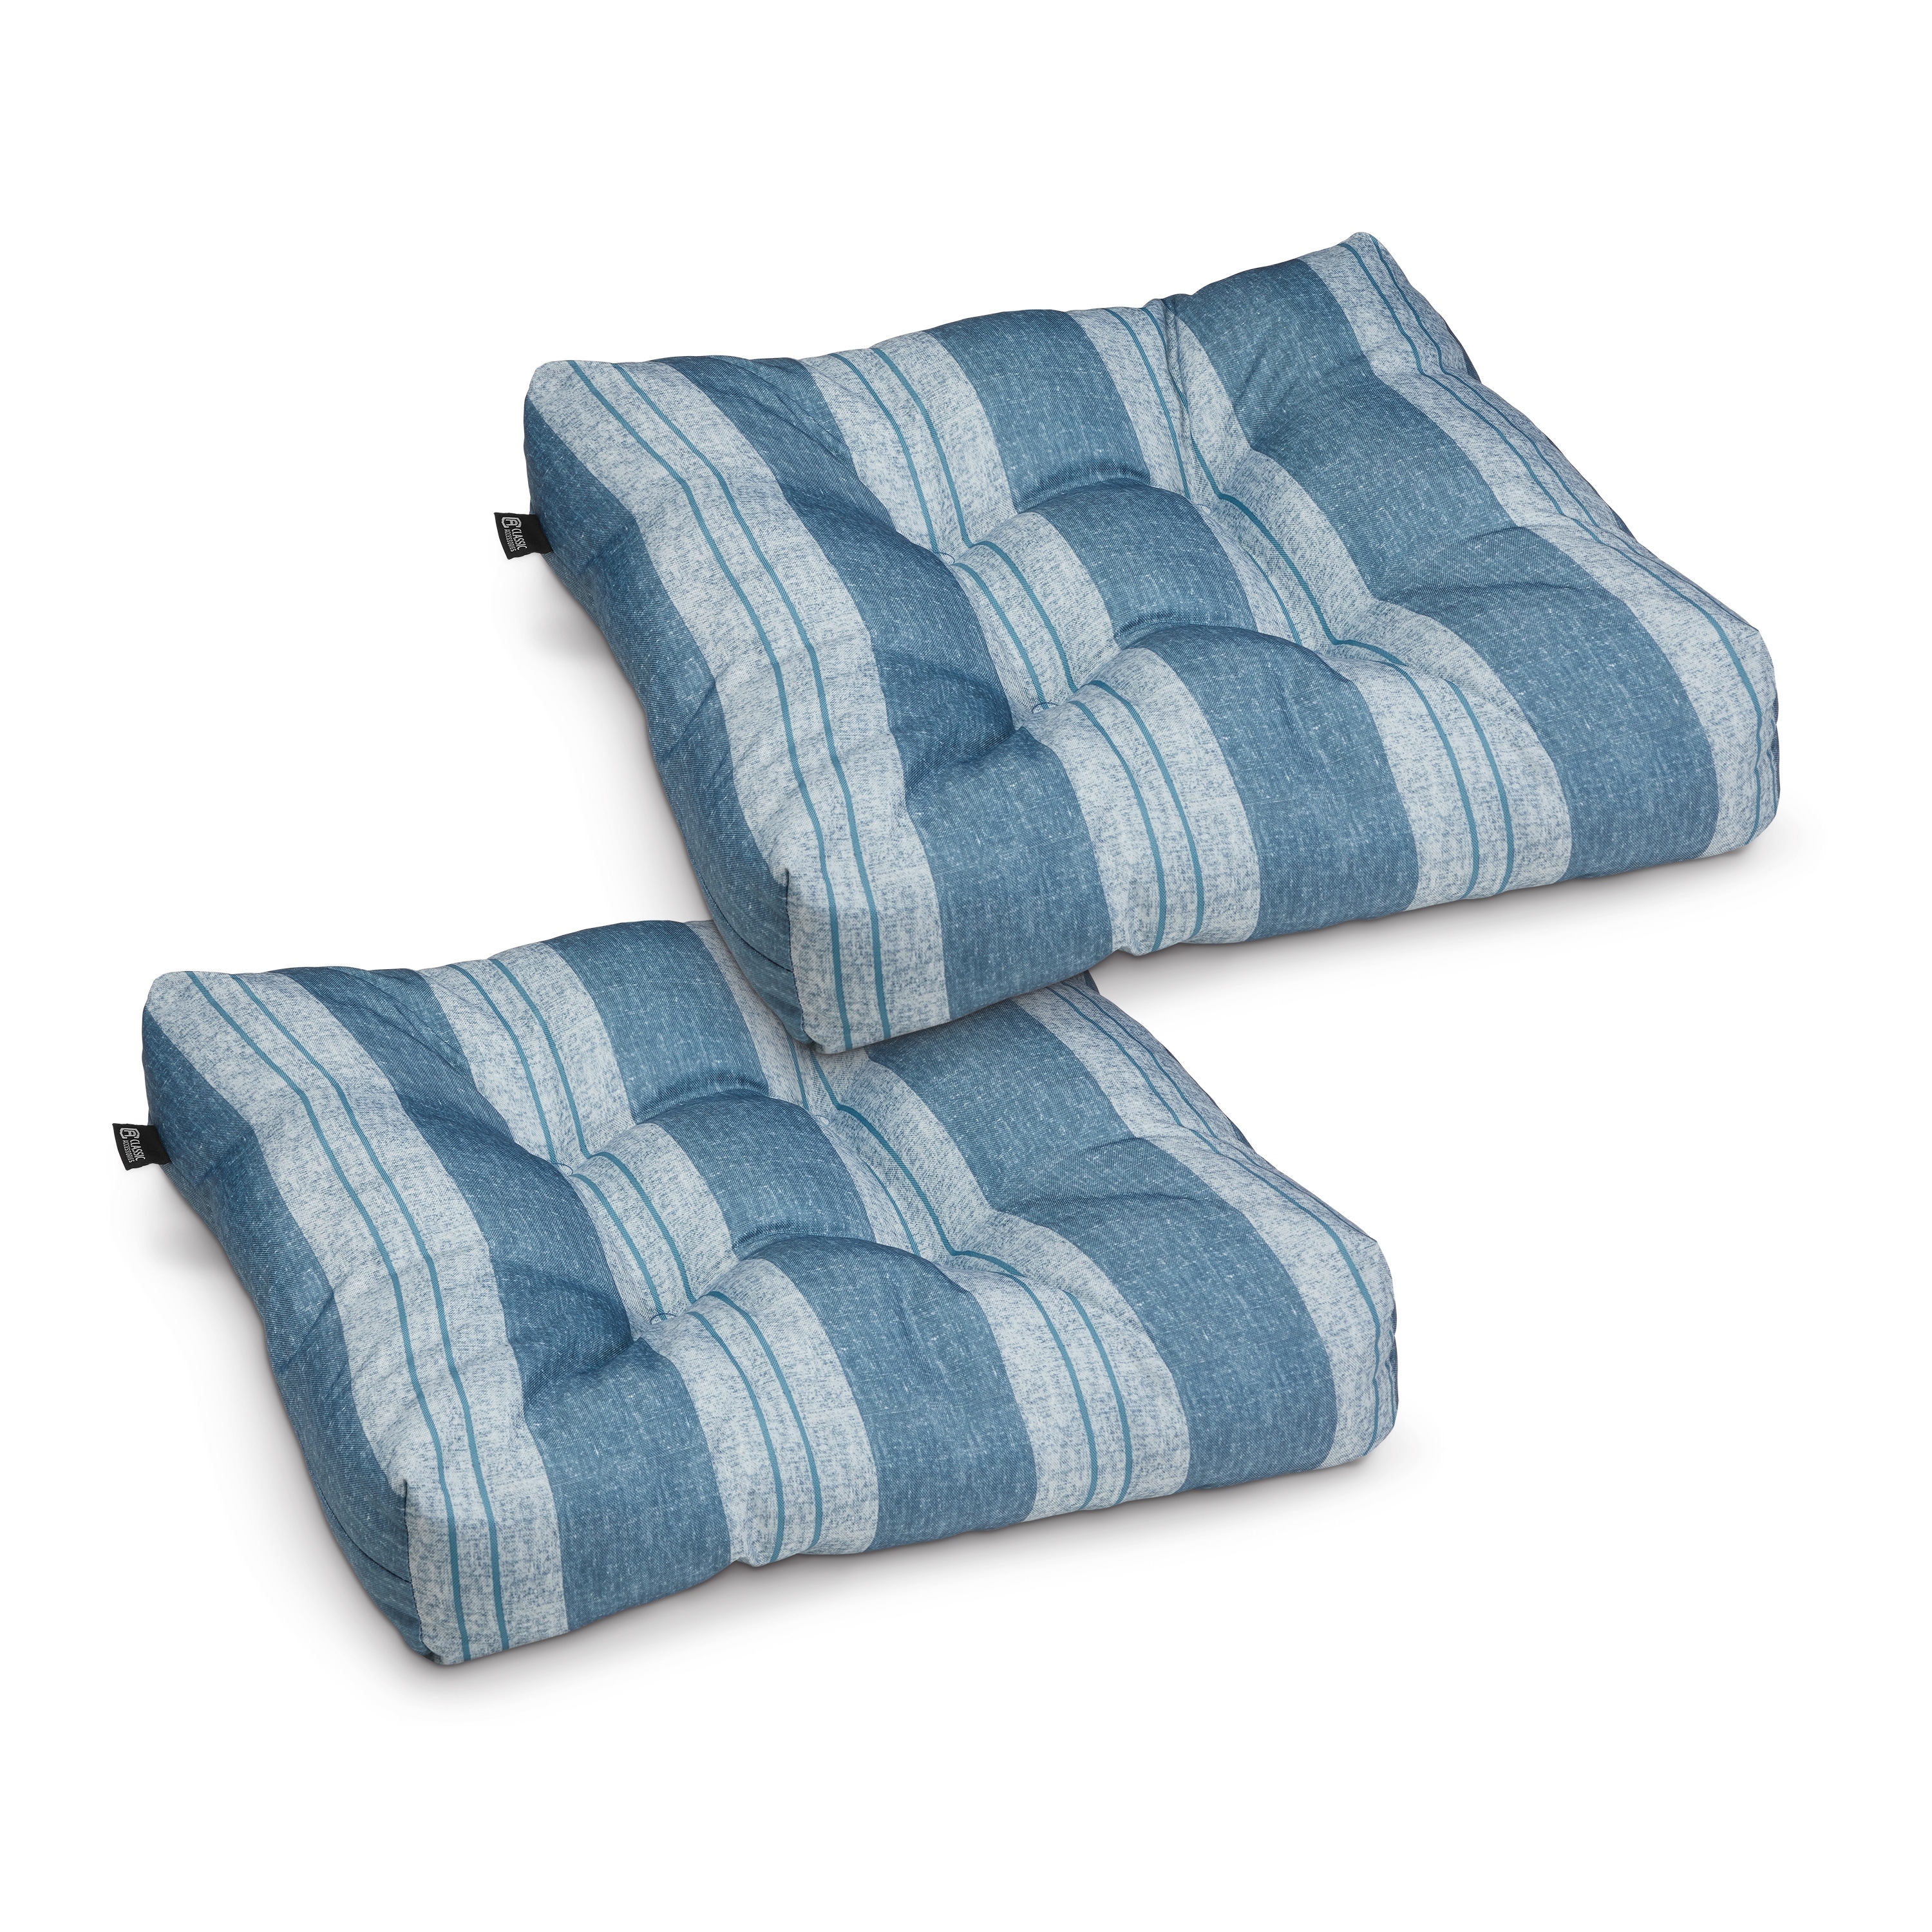 RACE LEAF Chair Cushions 19 x 19 Patio Chair Seat Pads, Set of 2 Thick  Fill Tufted Square Patio Cushions, Water-Resistant with Ties for Non-Slip